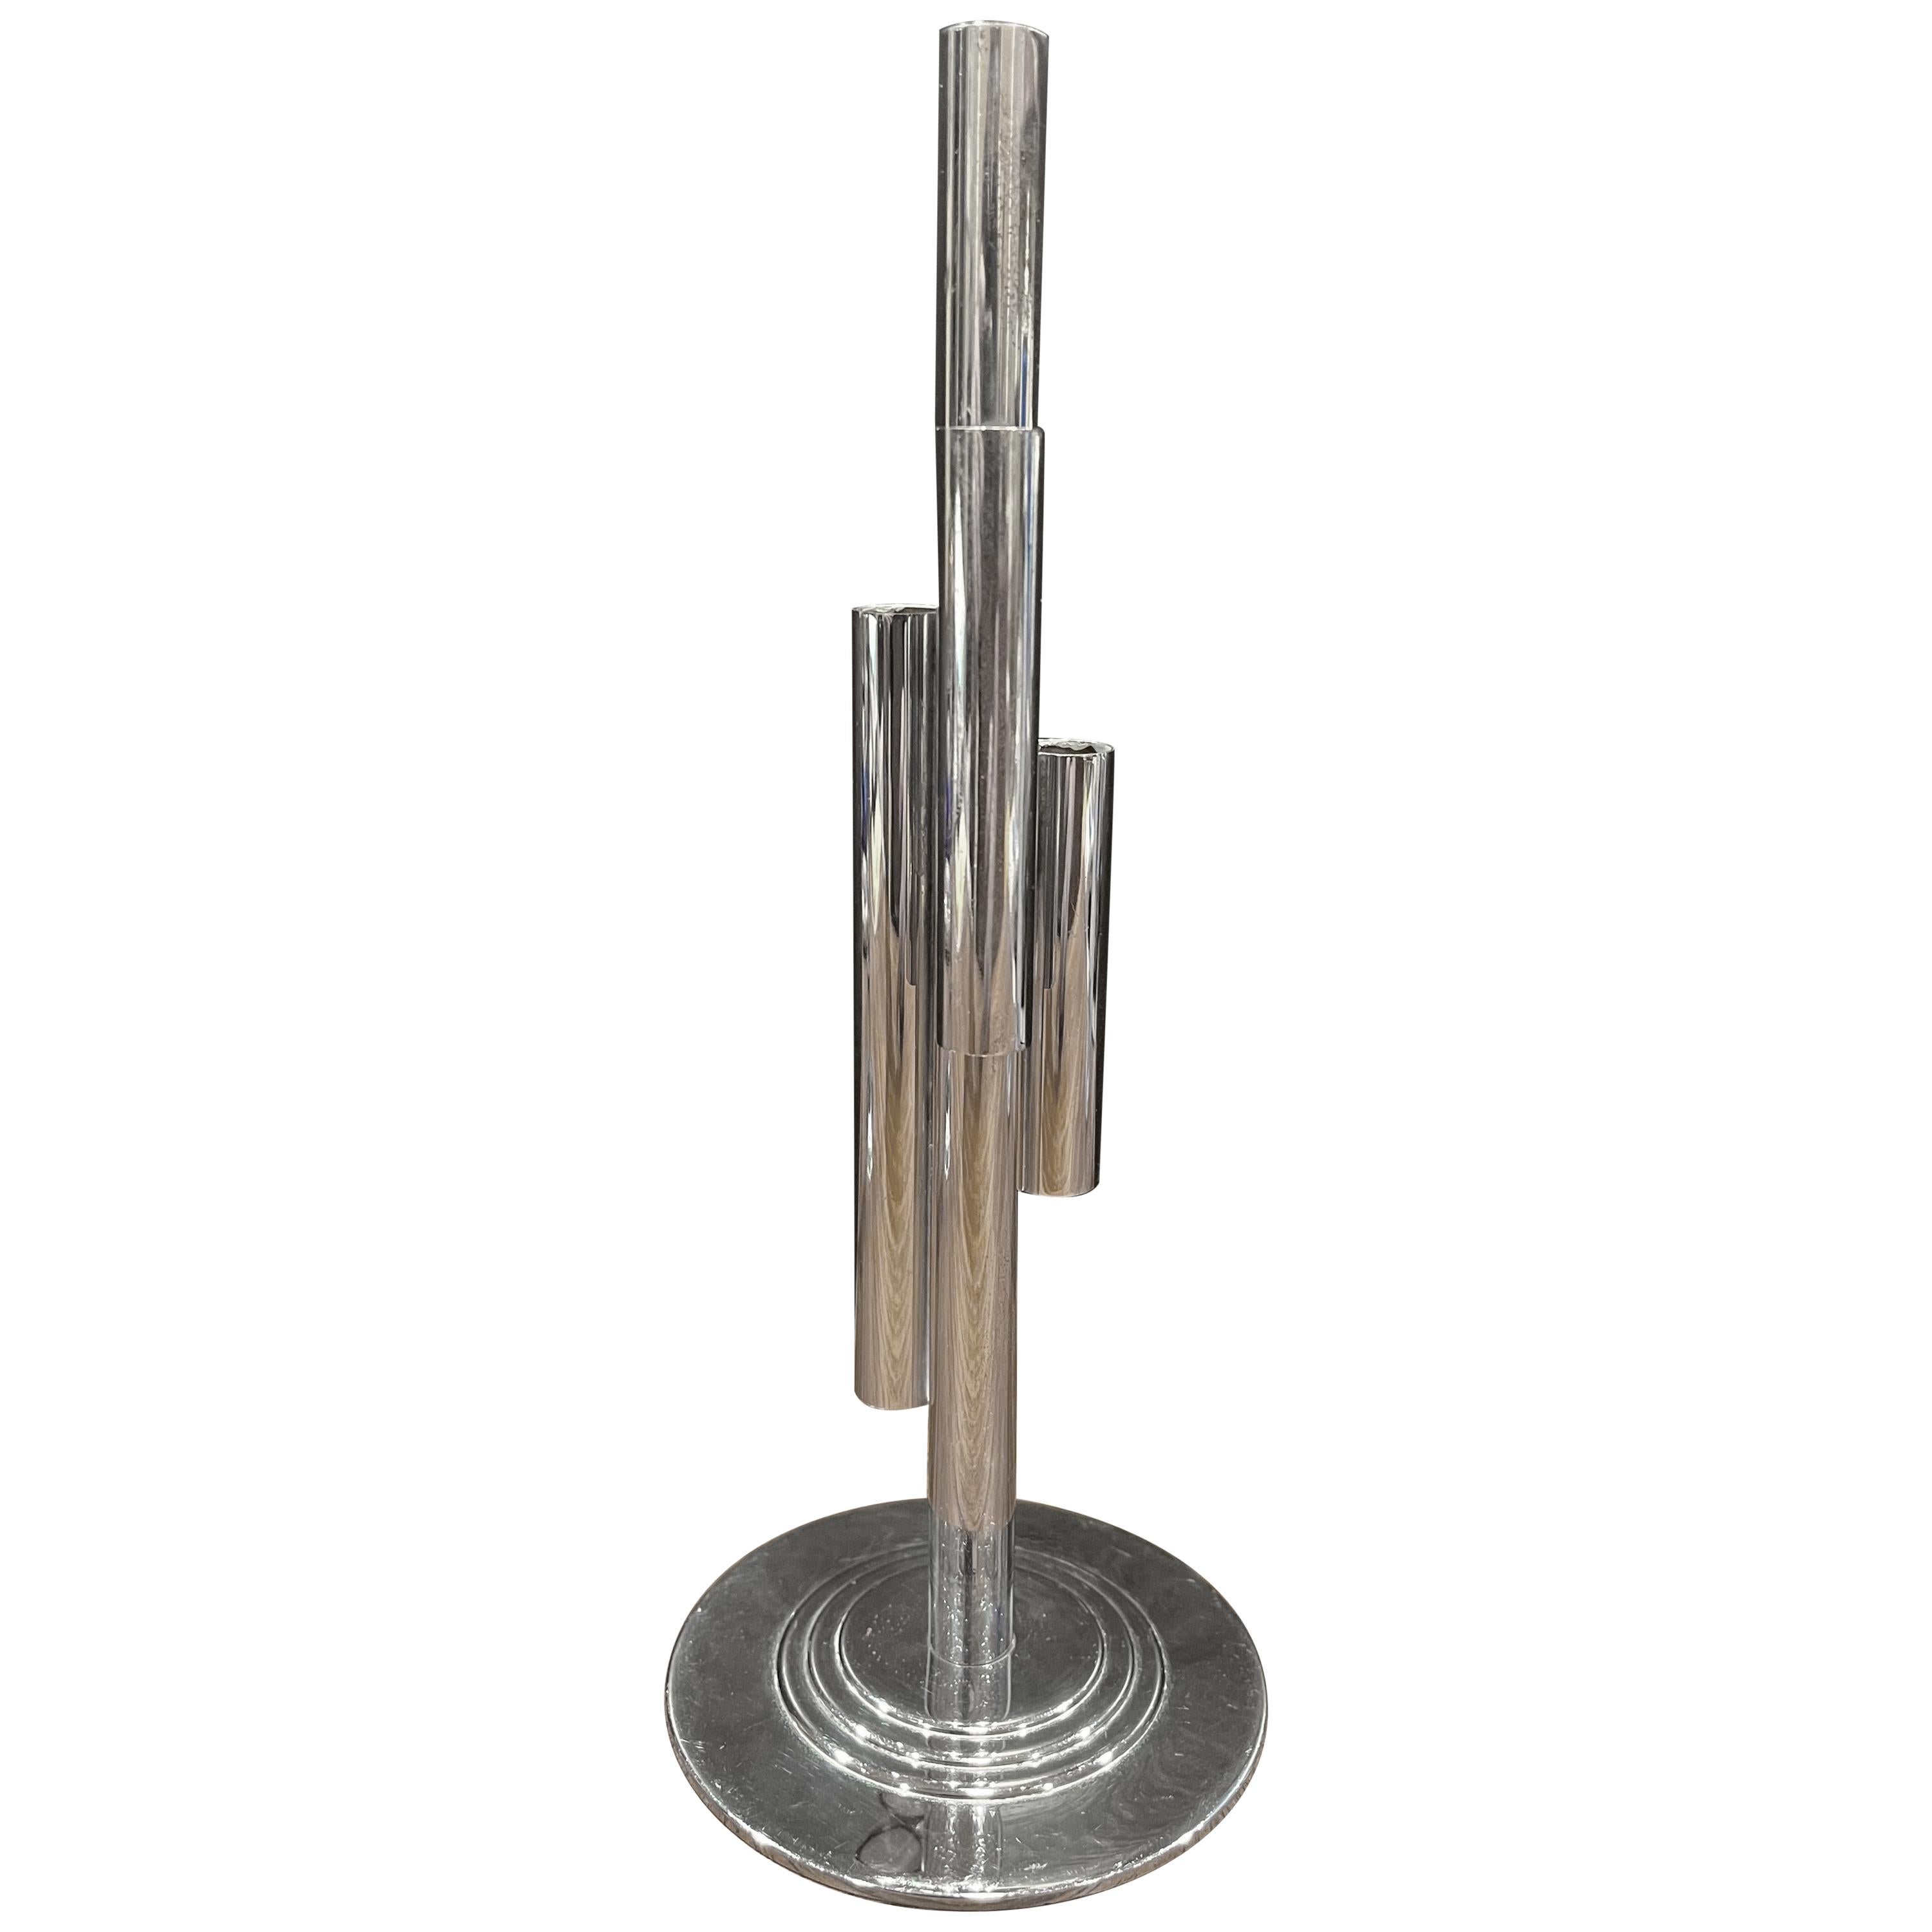 Art Deco Tubular Chrome Bud Vase by Ruth & William Gerth for Chase Co